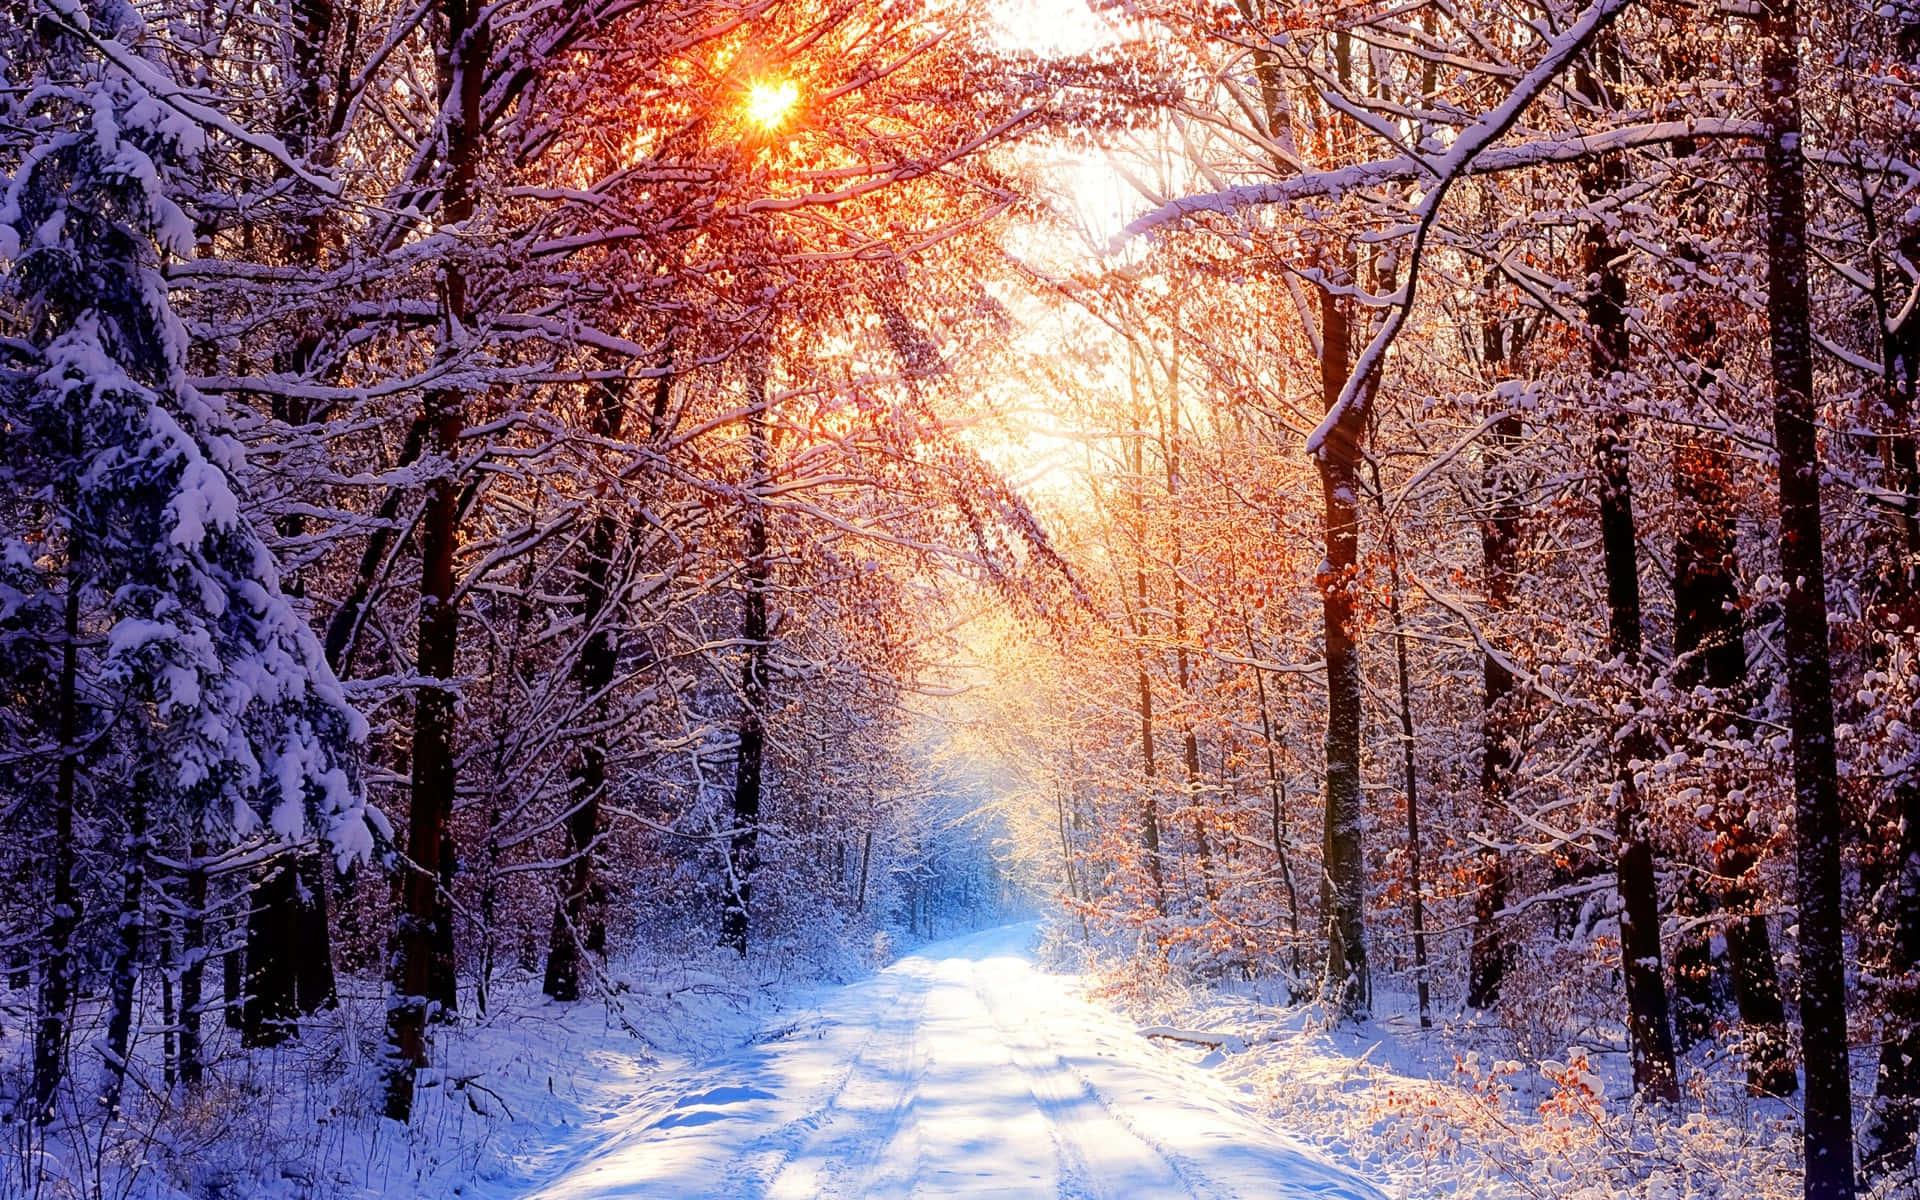 hd wallpapers of winter